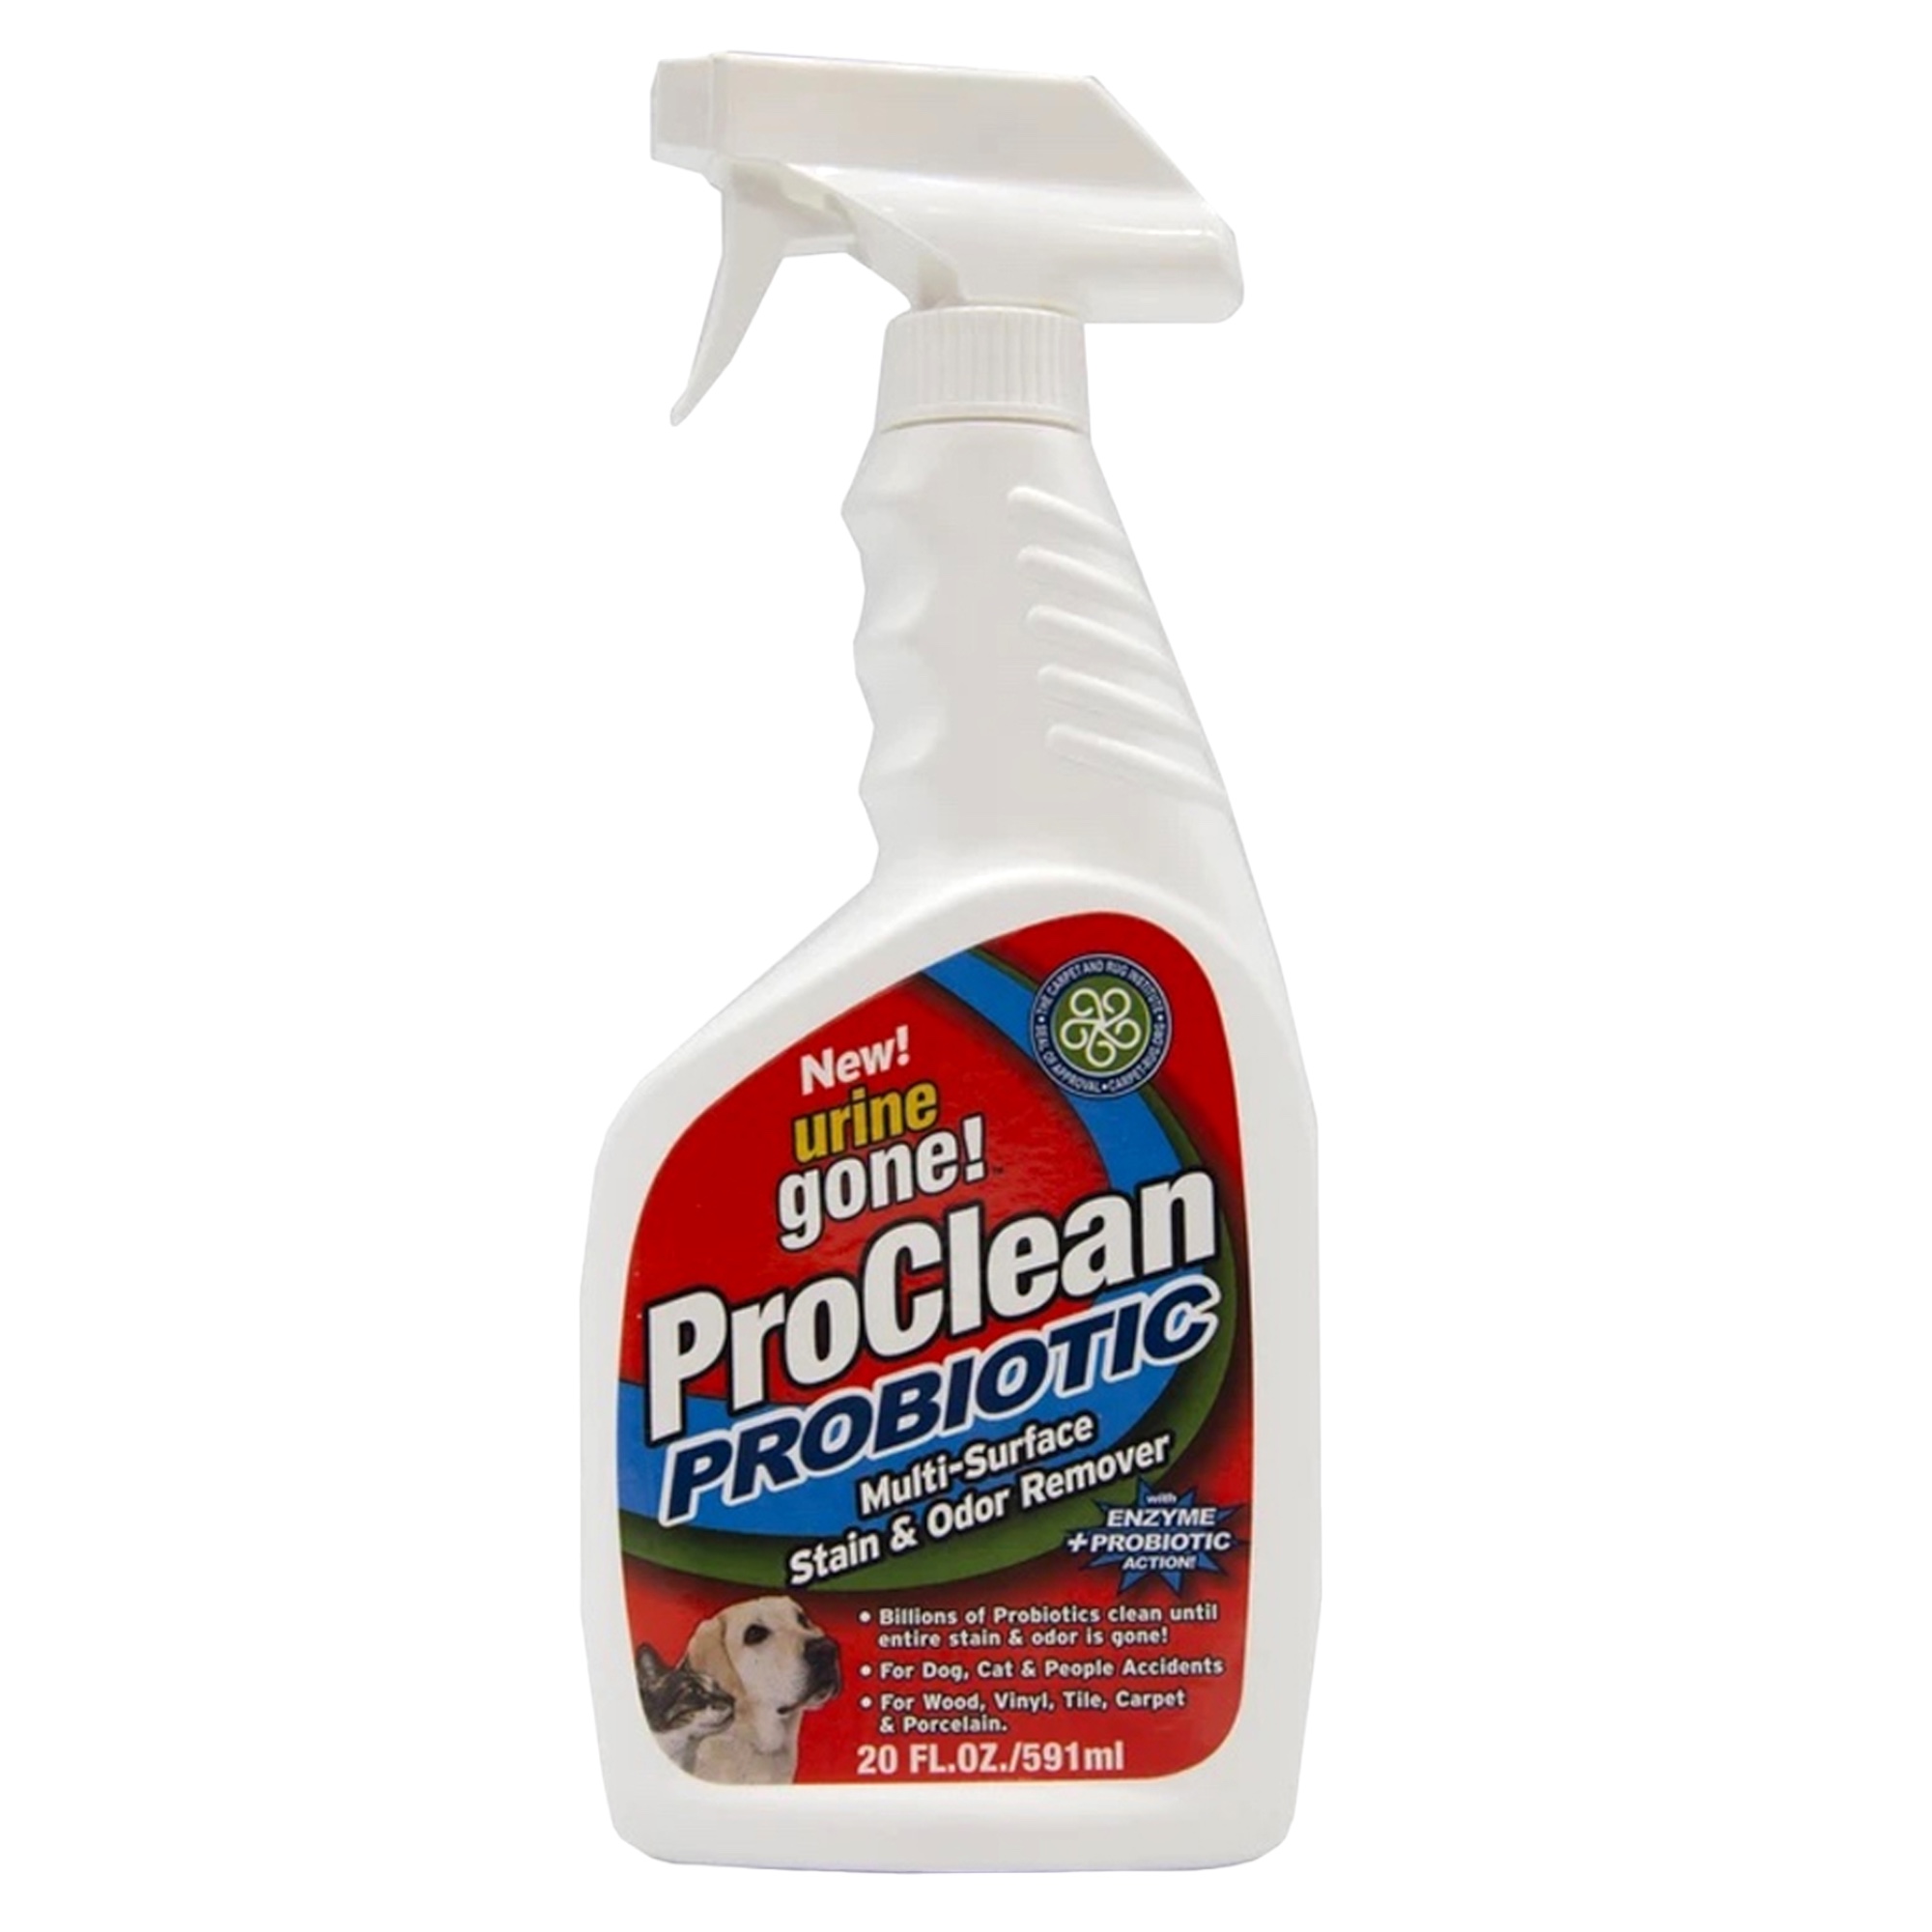 Urine Gone ProClean Stain and Odor Remover , 20 Fl Oz